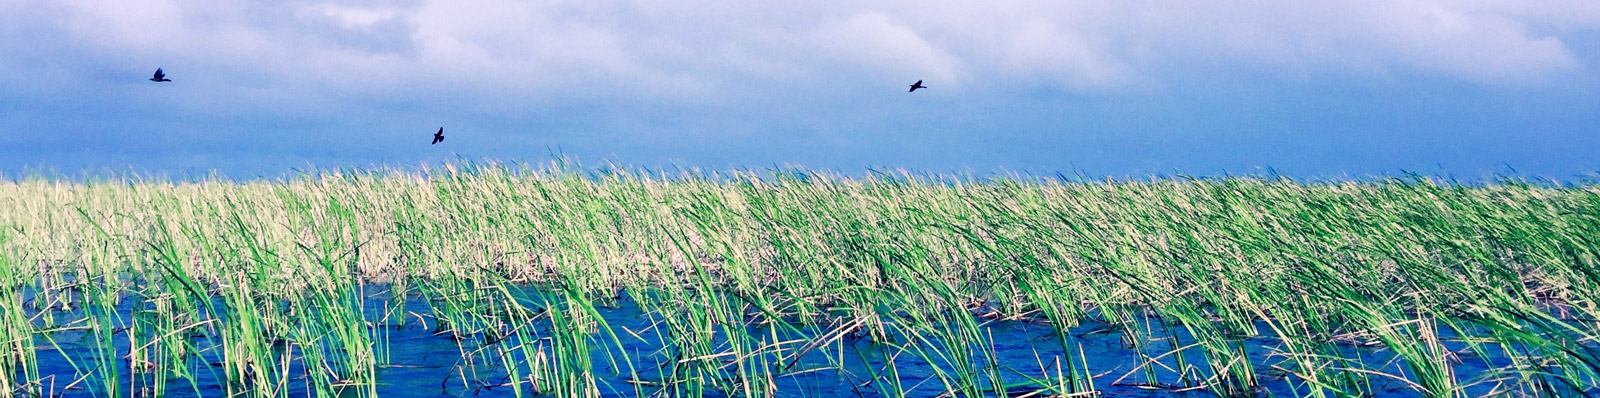 image of birds flying over sawgrass in the Everyglades